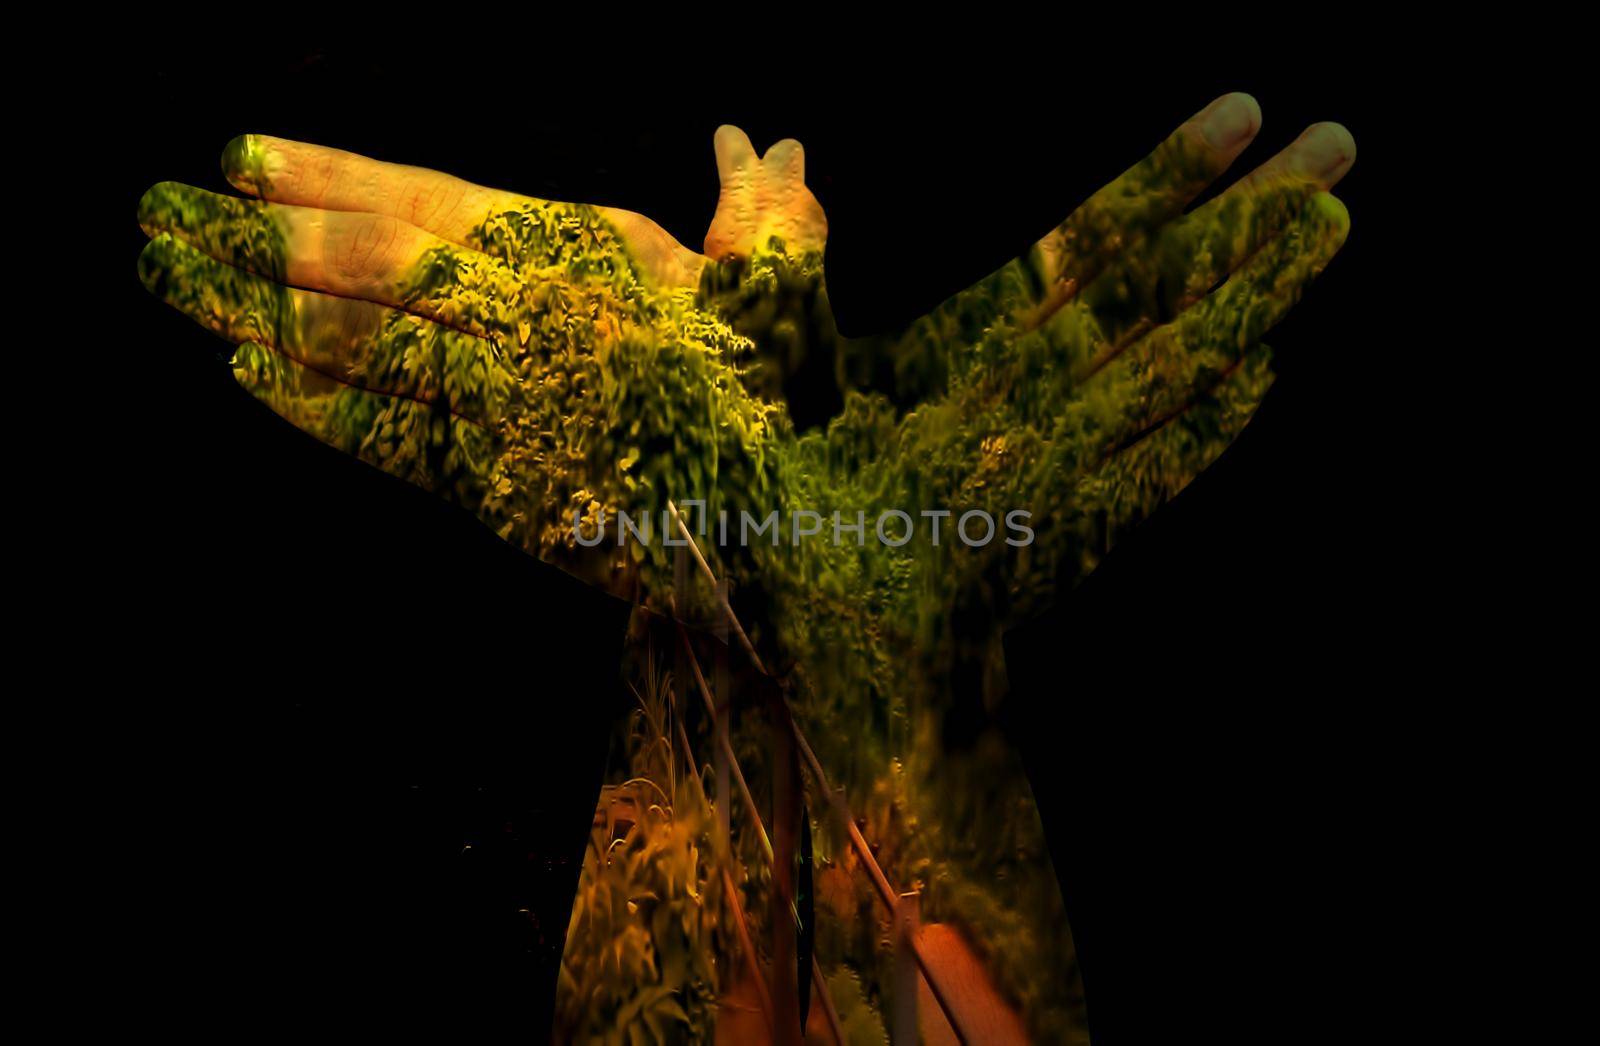 Double exposure shot of pair of hands with some caring hand sign isolated. Concept of care for mother nature. by mirzamlk